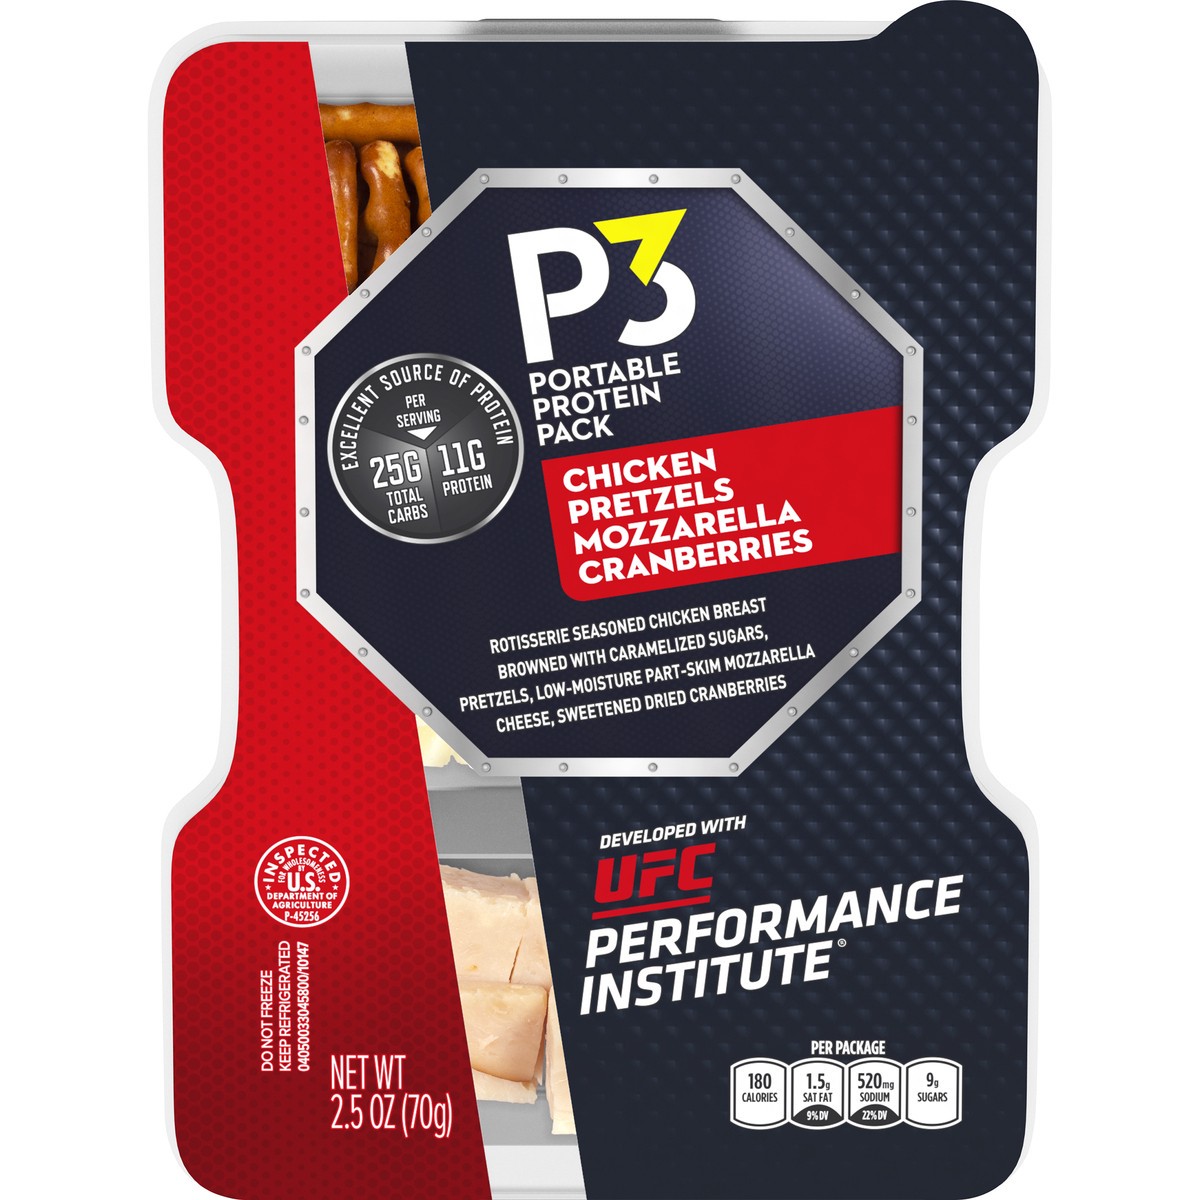 slide 1 of 10, P3 Portable Protein Pack Developed With UFC Performance Institute Rotisserie Seasoned Chicken, Pretzels, Mozzarella Cheese, and Dried Cranberries 2.5 oz Tray, 2.5 oz